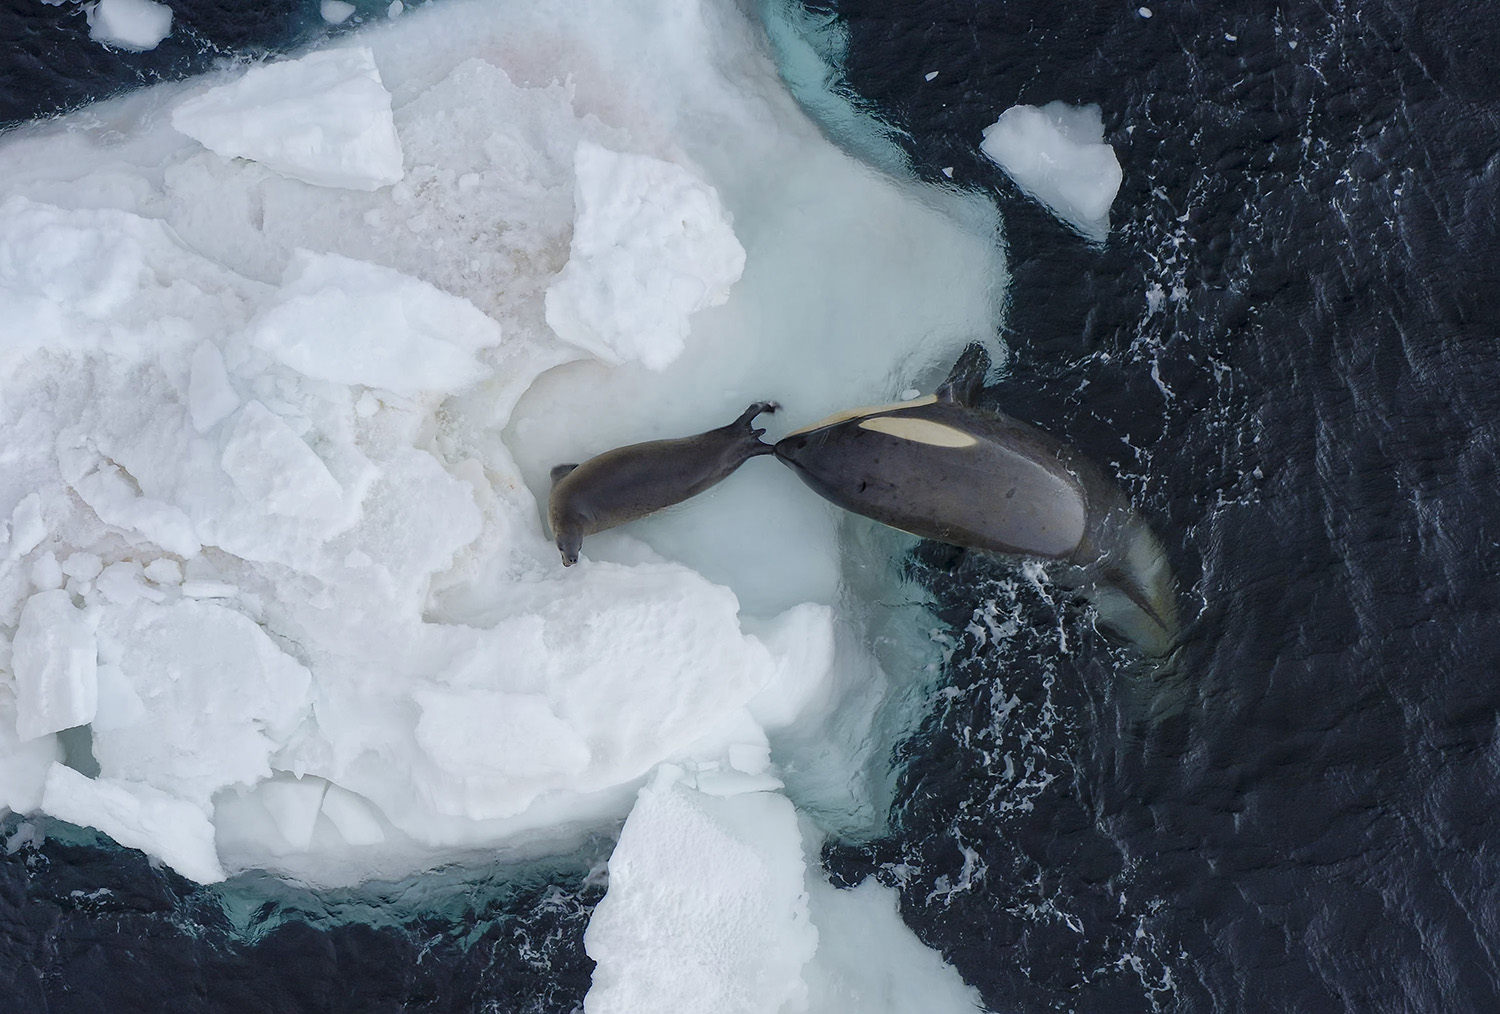 Aerial shot of a Weddell Seal on the ice being held by the tail flipper by a Killer Whale half out of the water on the ice.